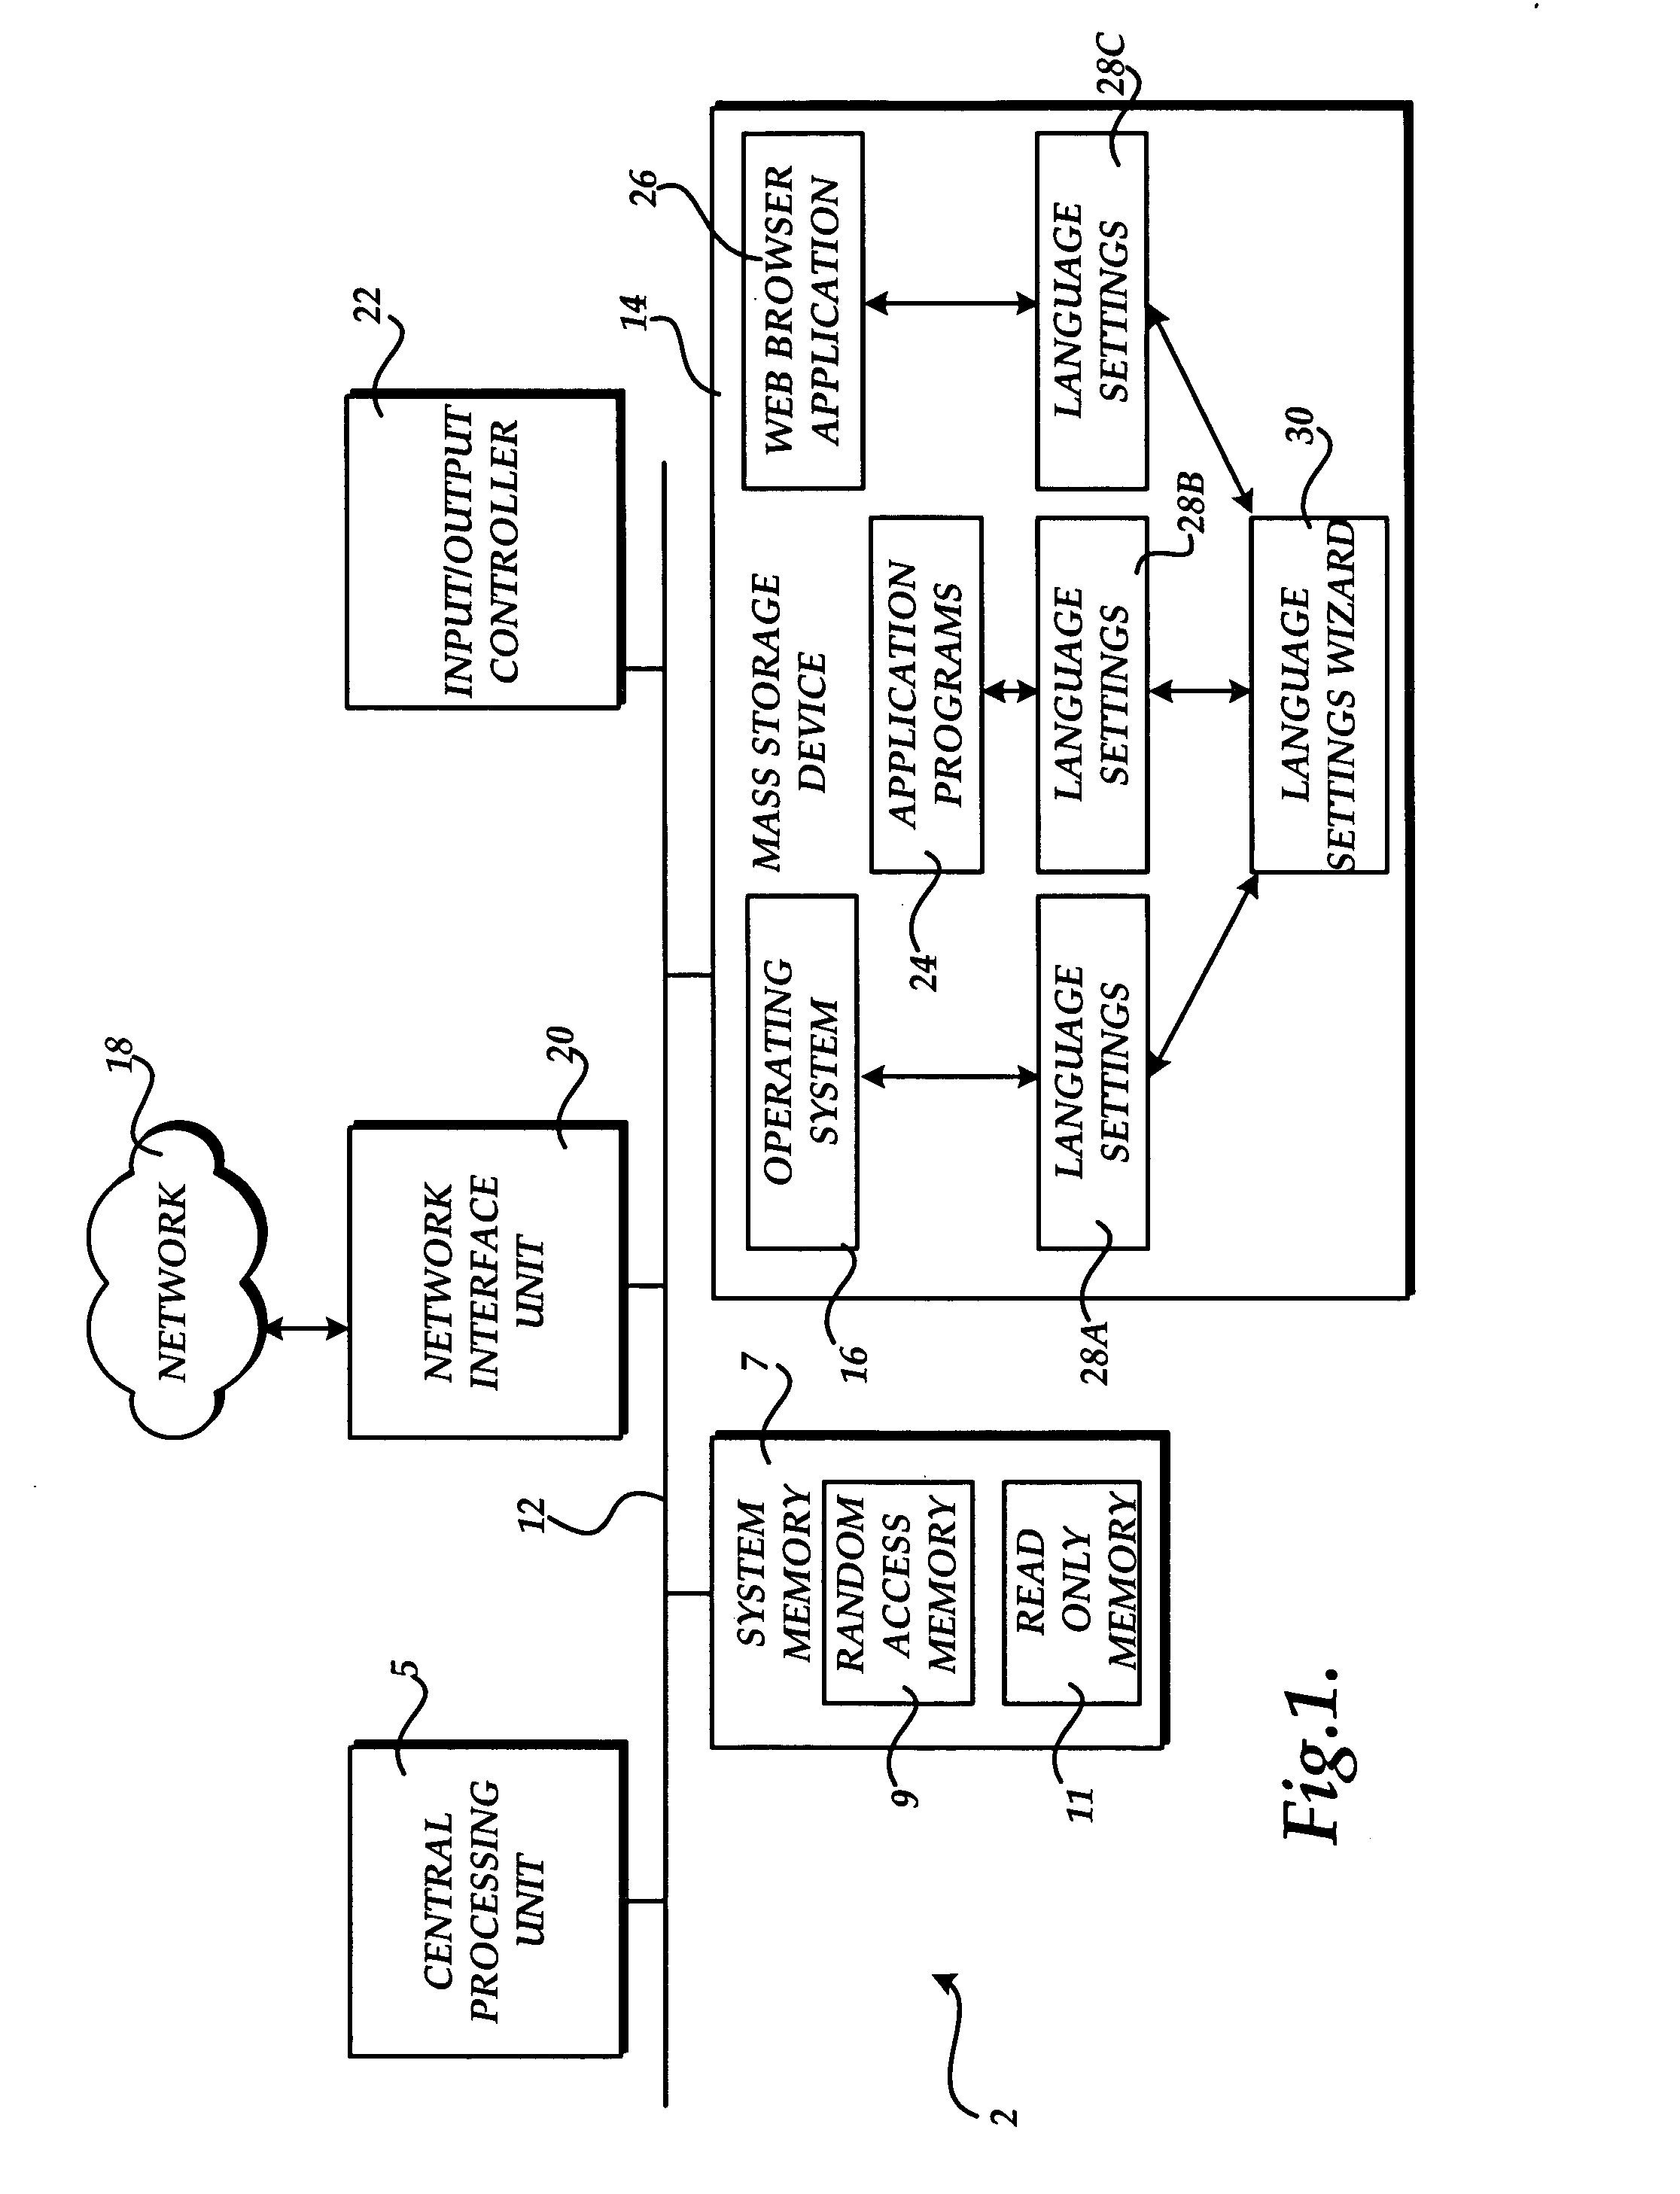 Method and computer-readable medium for consistent configuration of language support across operating system and application programs